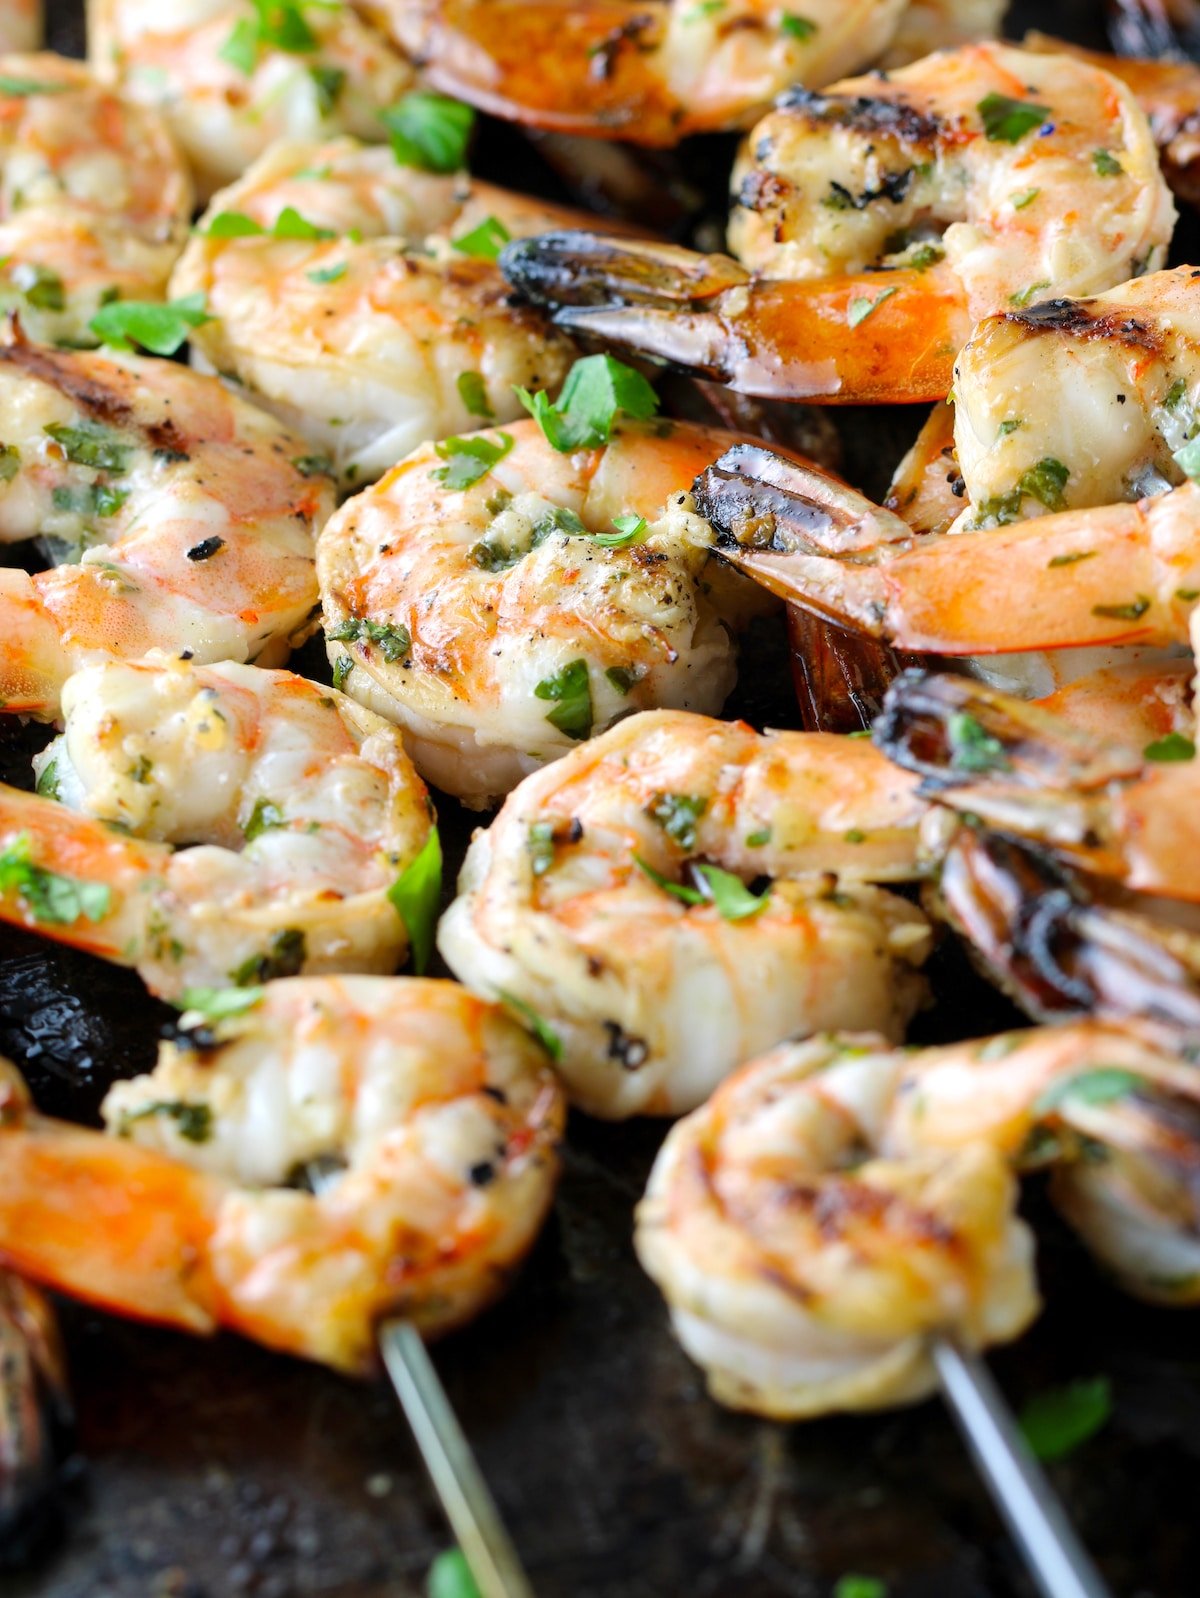 A close-up of grilled shrimp on a baking sheet.